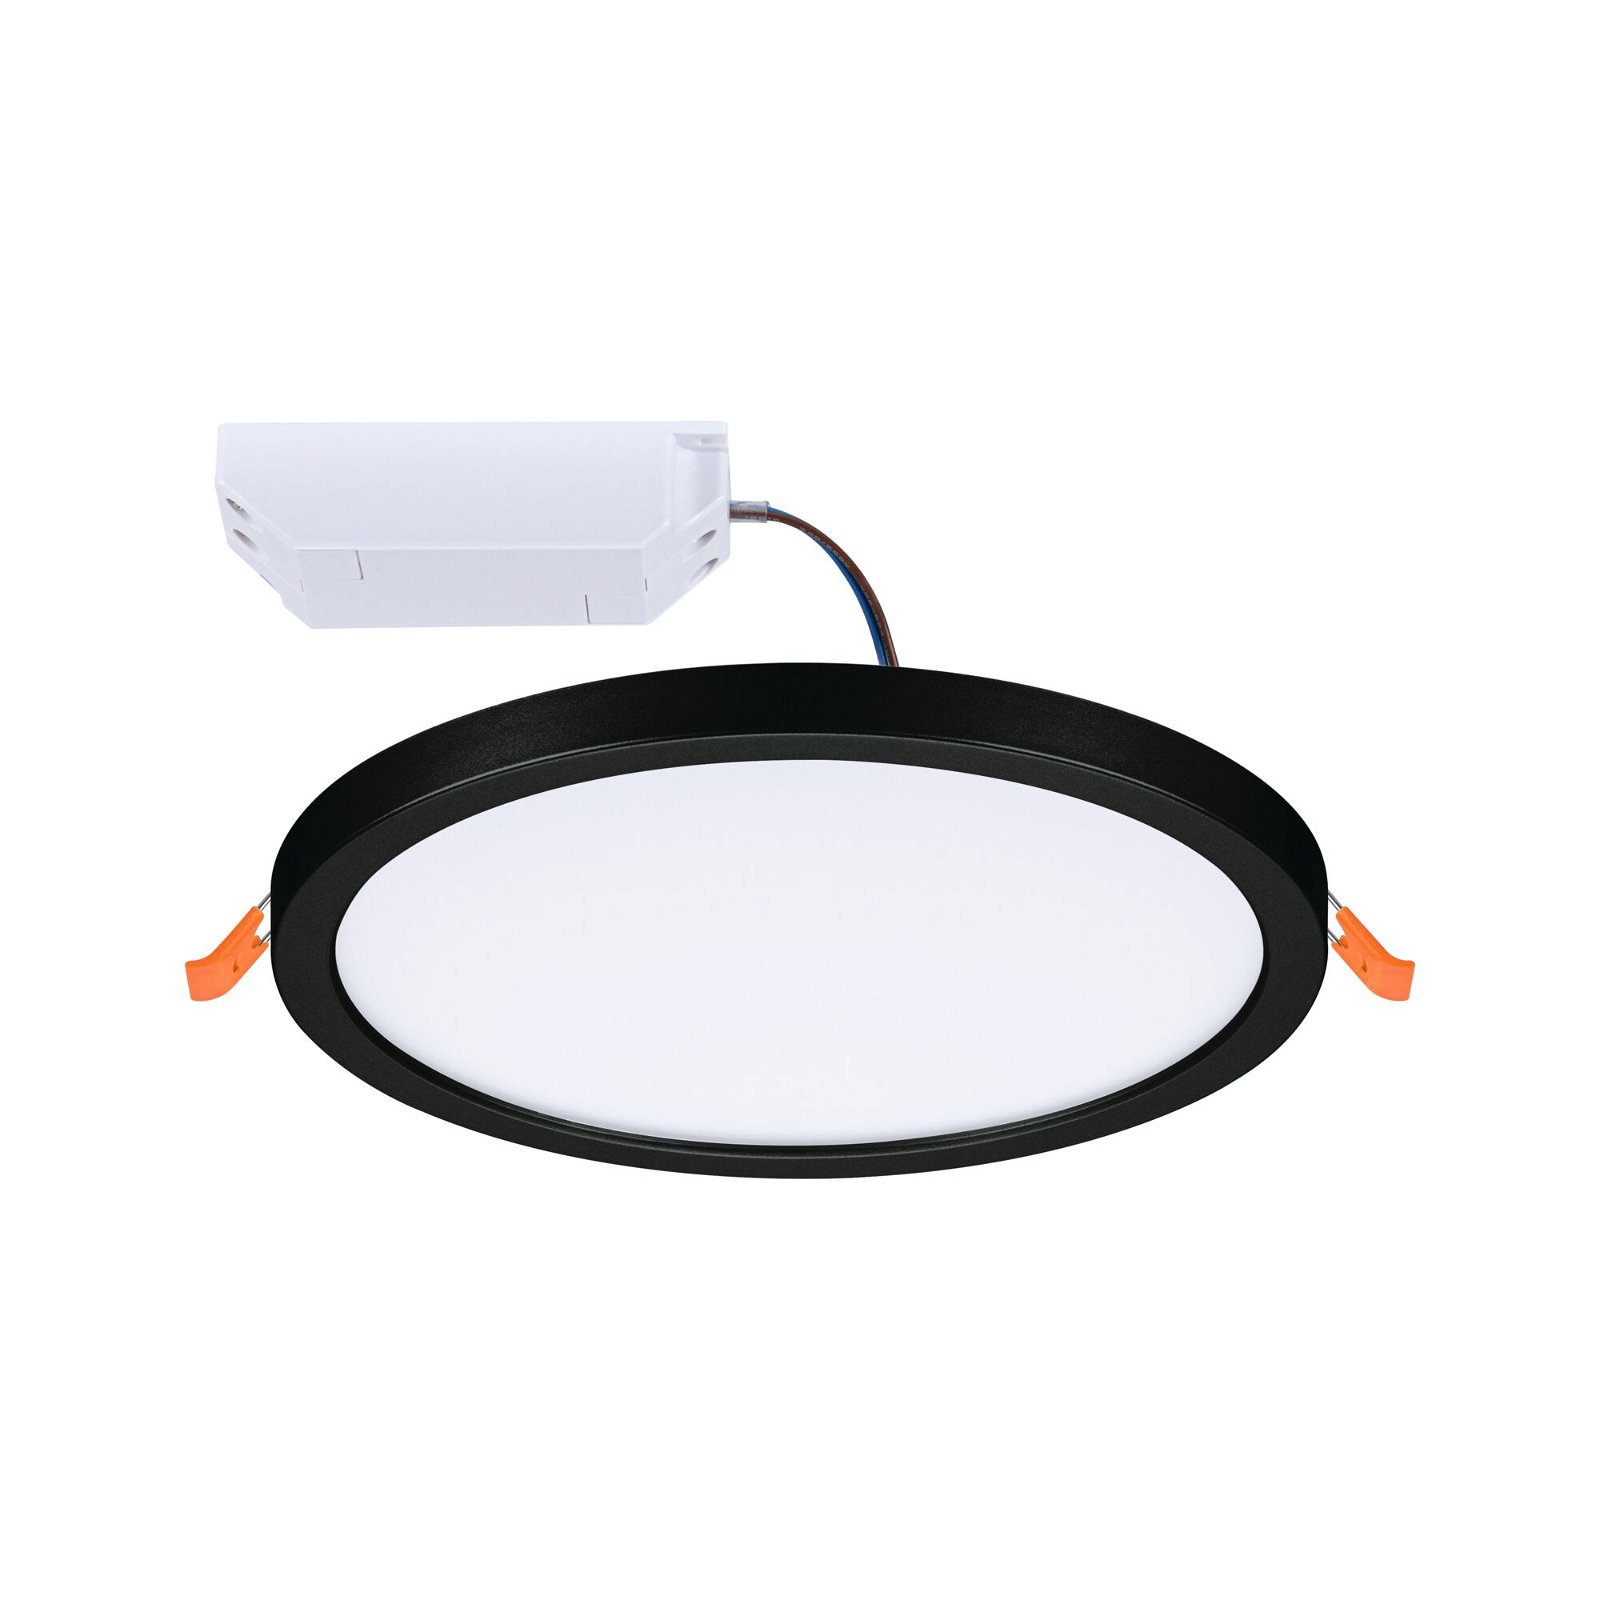 VariFit LED Recessed panel 3-Step-Dim Areo IP44 round 175mm 13W 1300lm 3000K Black dimmable